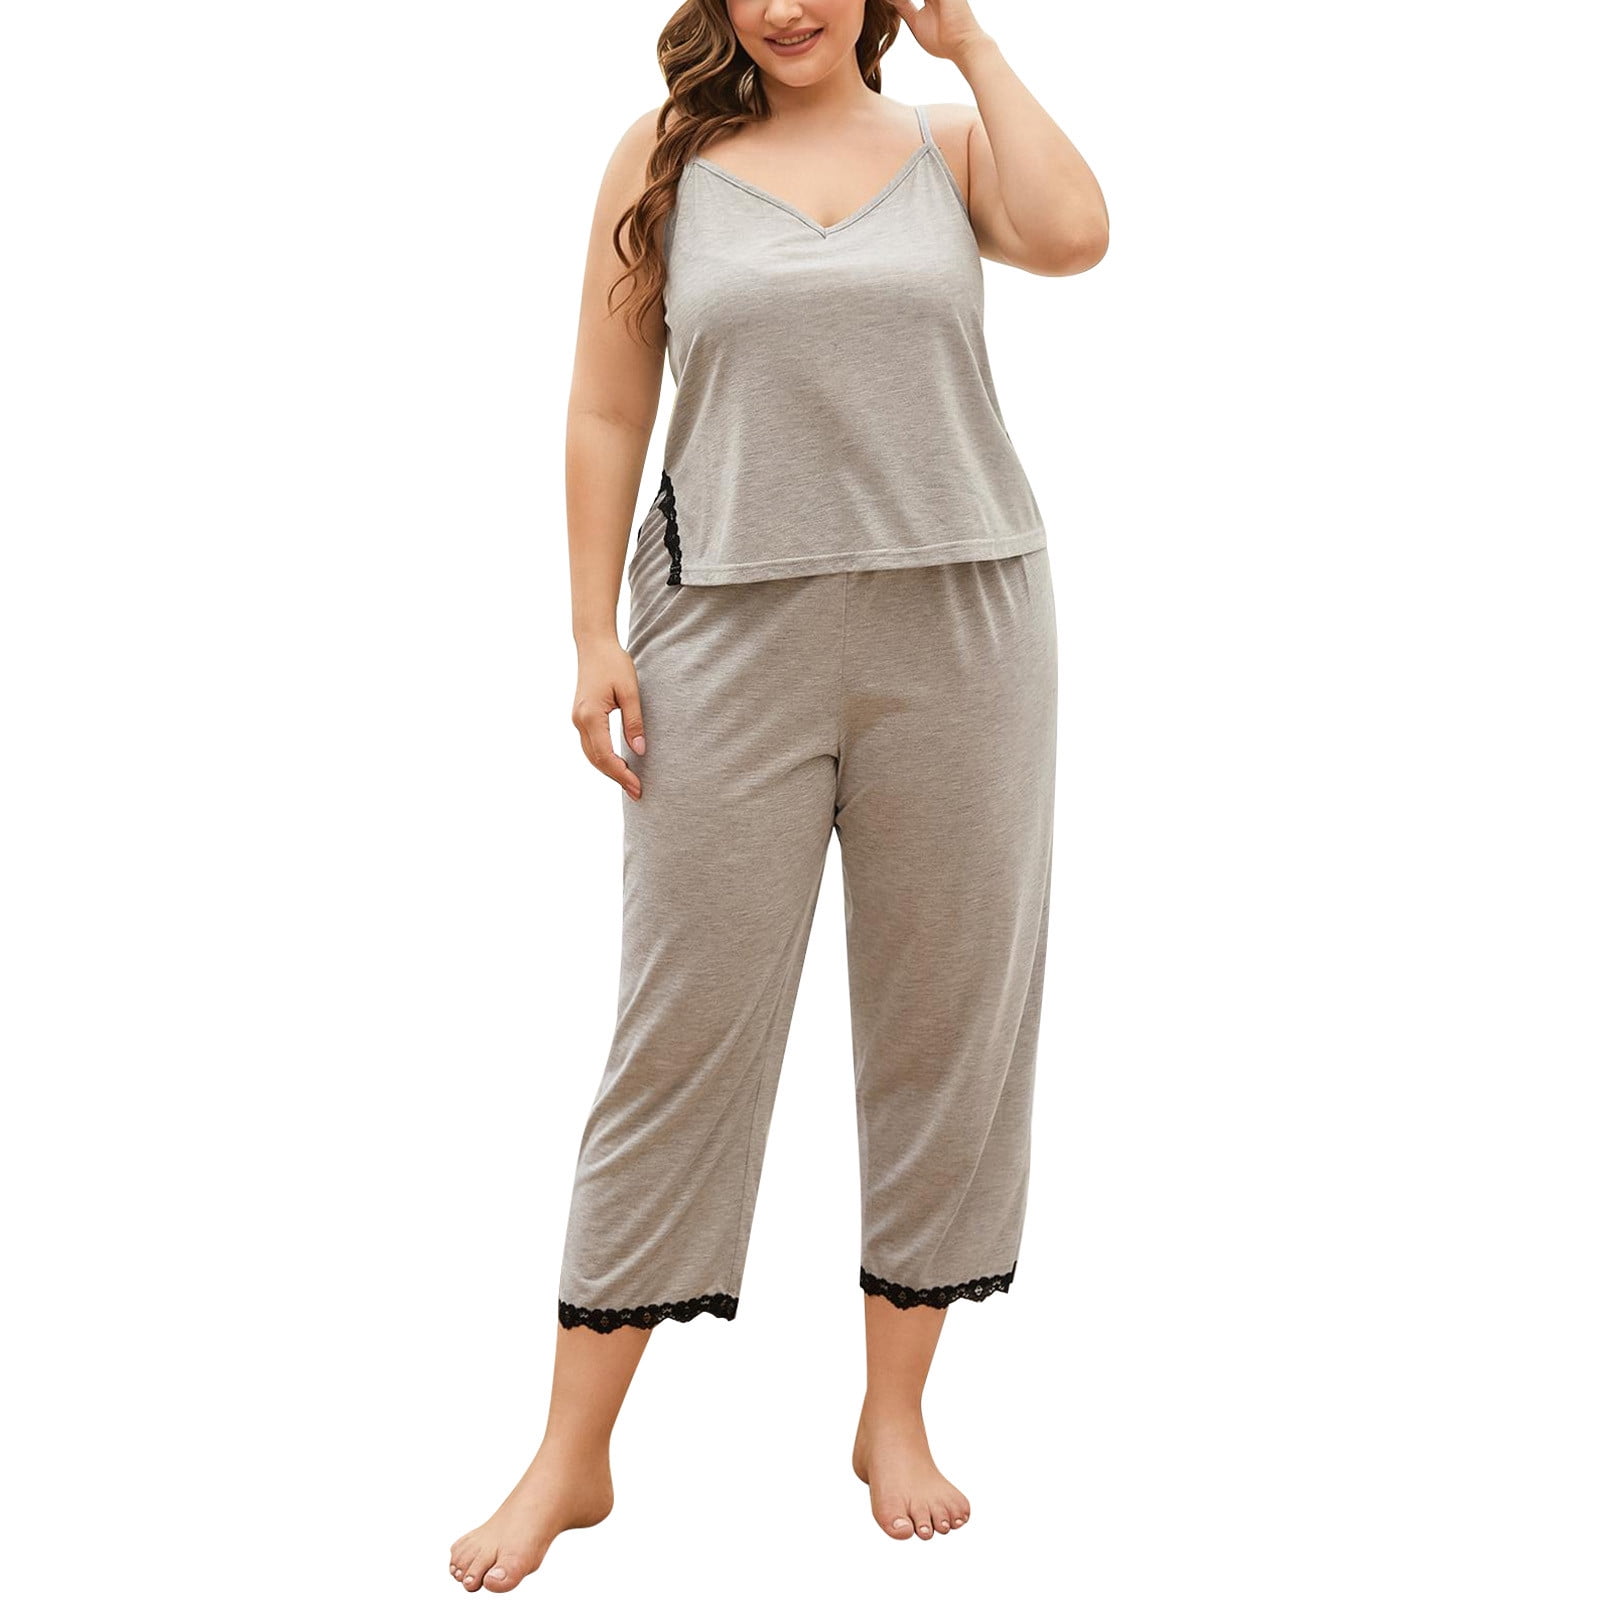 ZRBYWB Pajamas For Women Summer Plus Size Comfortable Breathable Lace ...